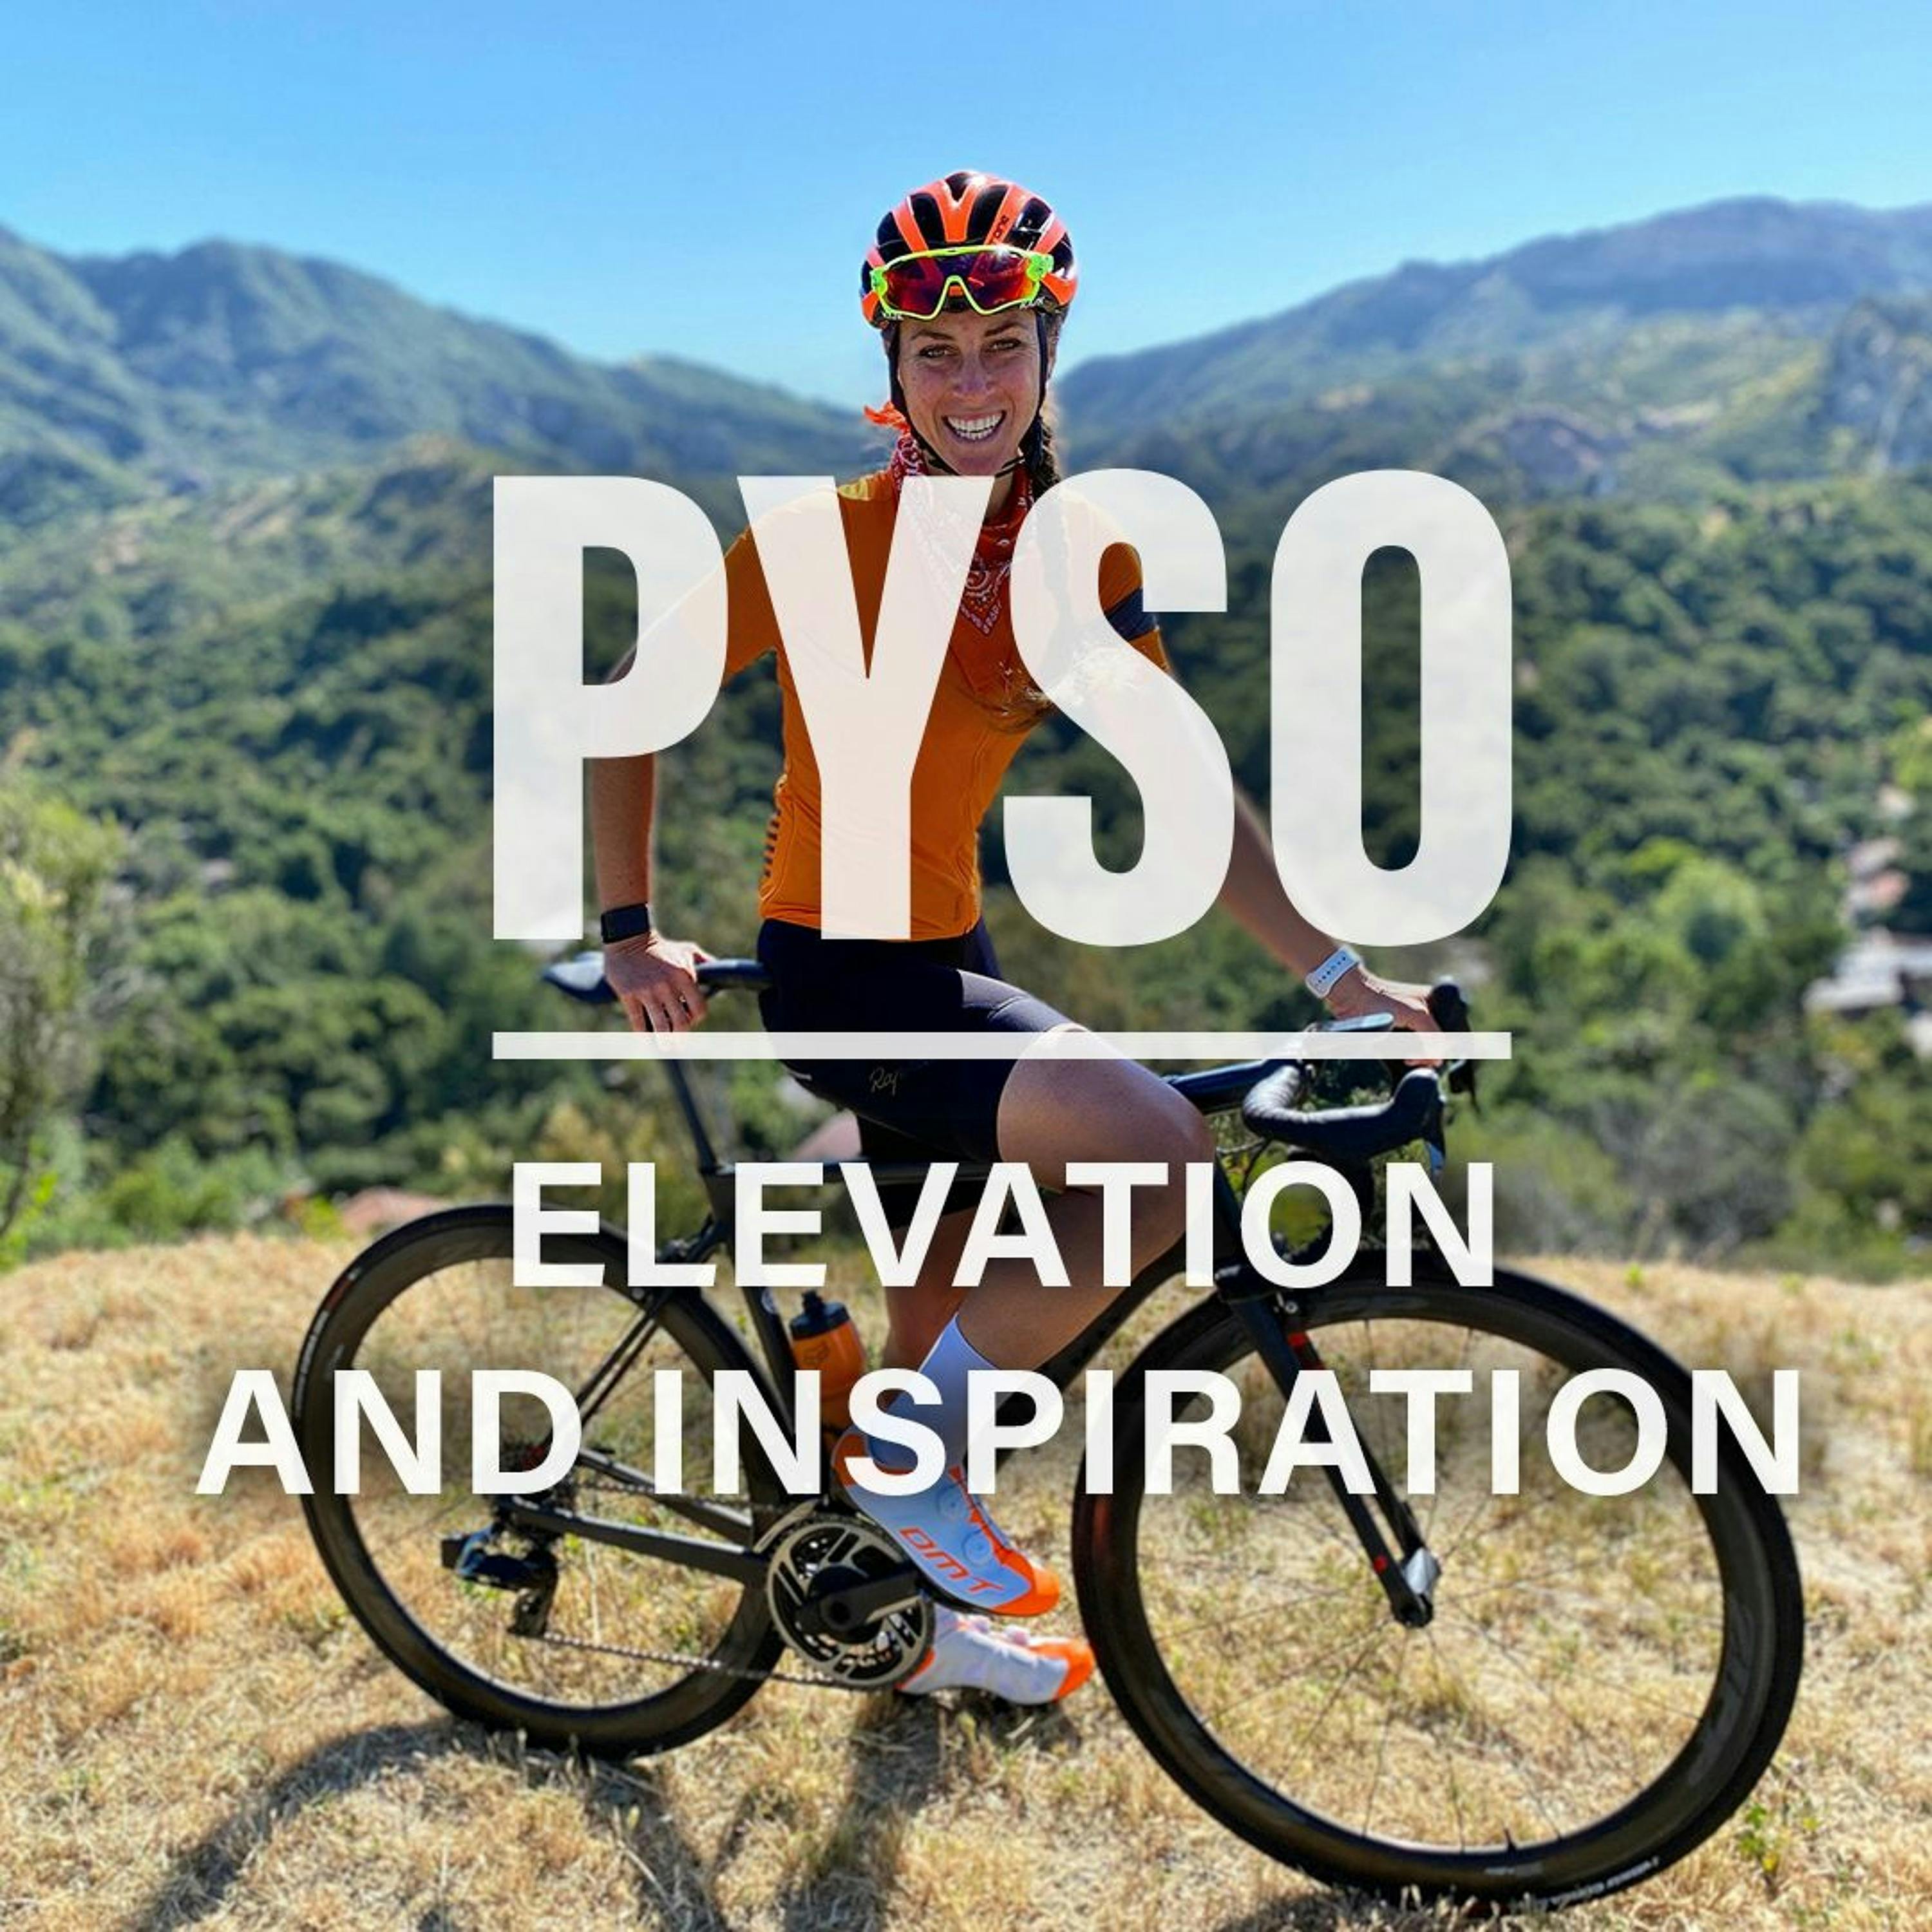 PYSO, ep. 64 Isabel King on cycling's intrinsic motivations and inspirations